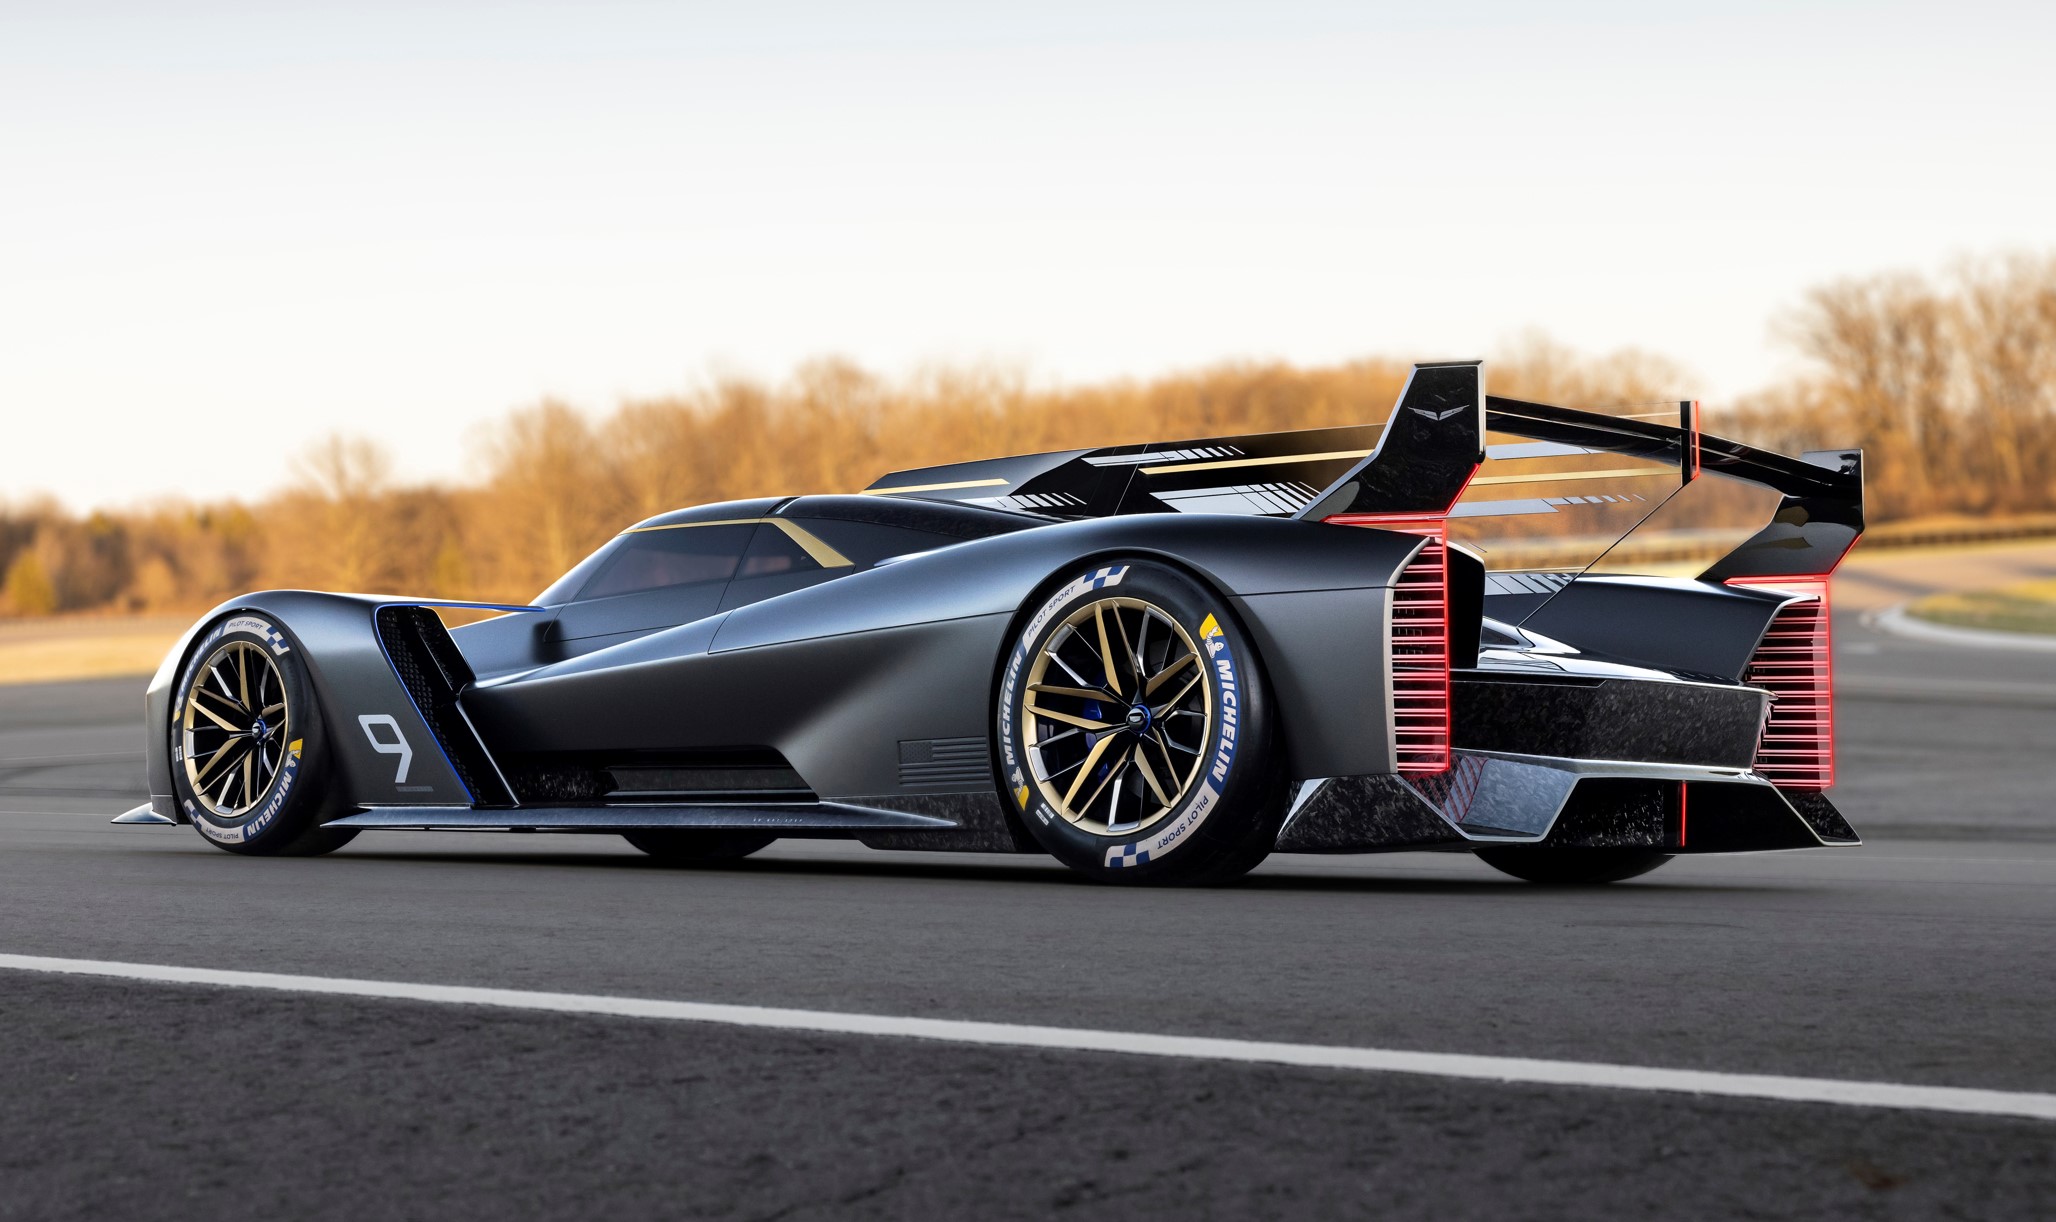 aria-label="Cadillac Project GTP Hypercar 2"